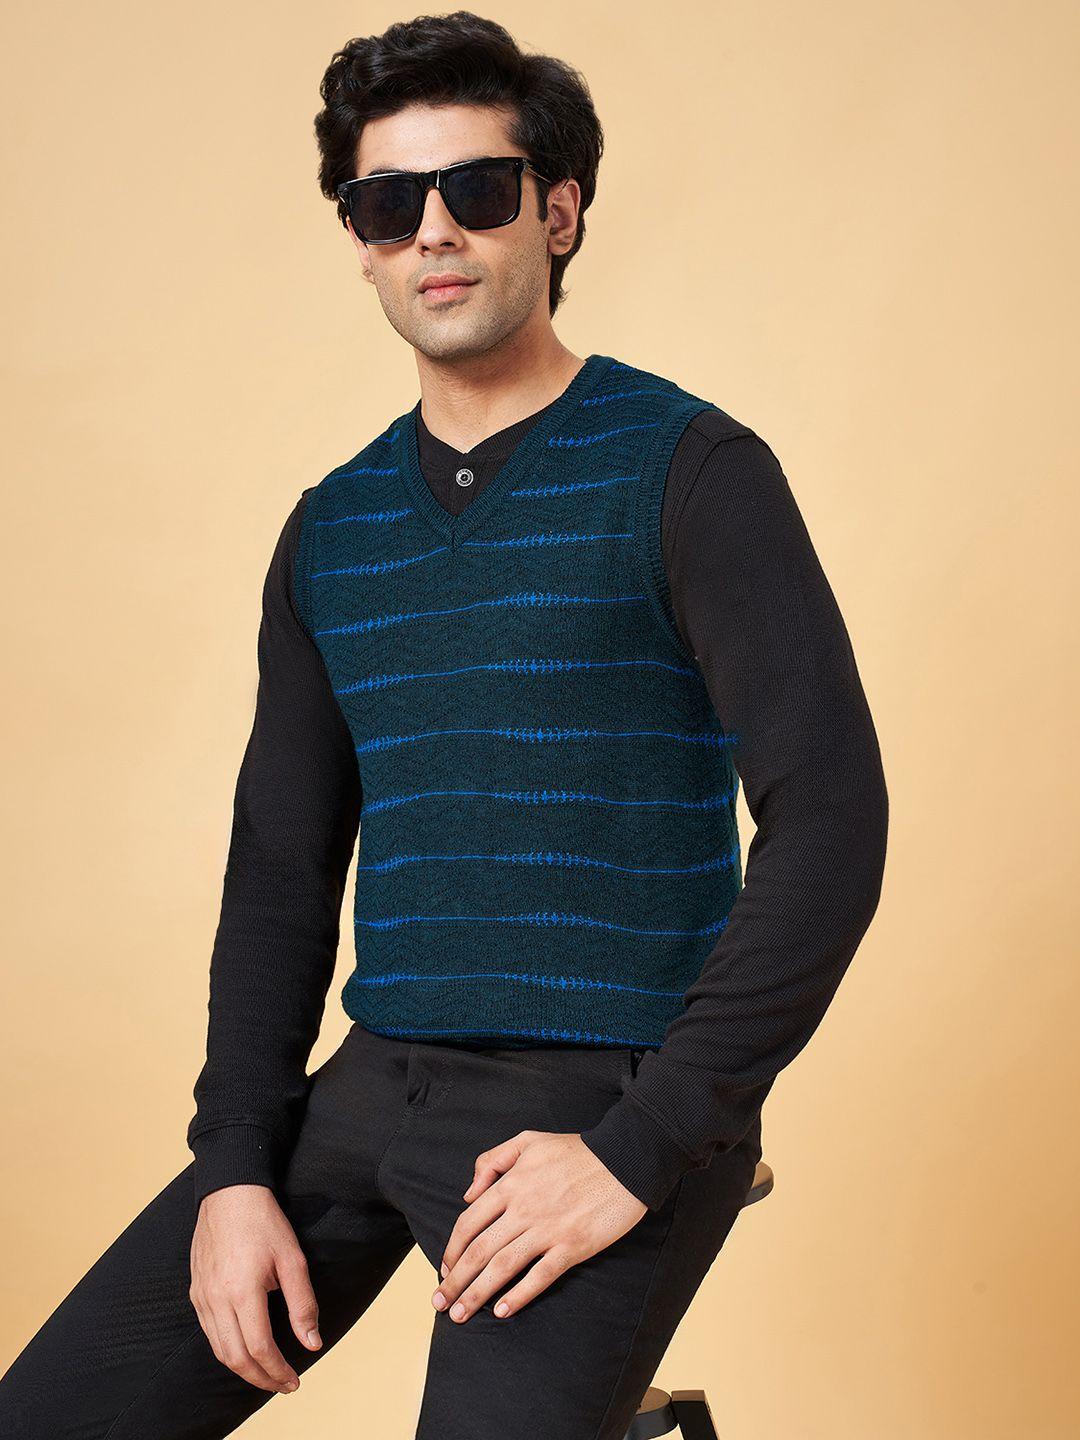 byford-by-pantaloons-men-teal-striped-sleeveless-sweater